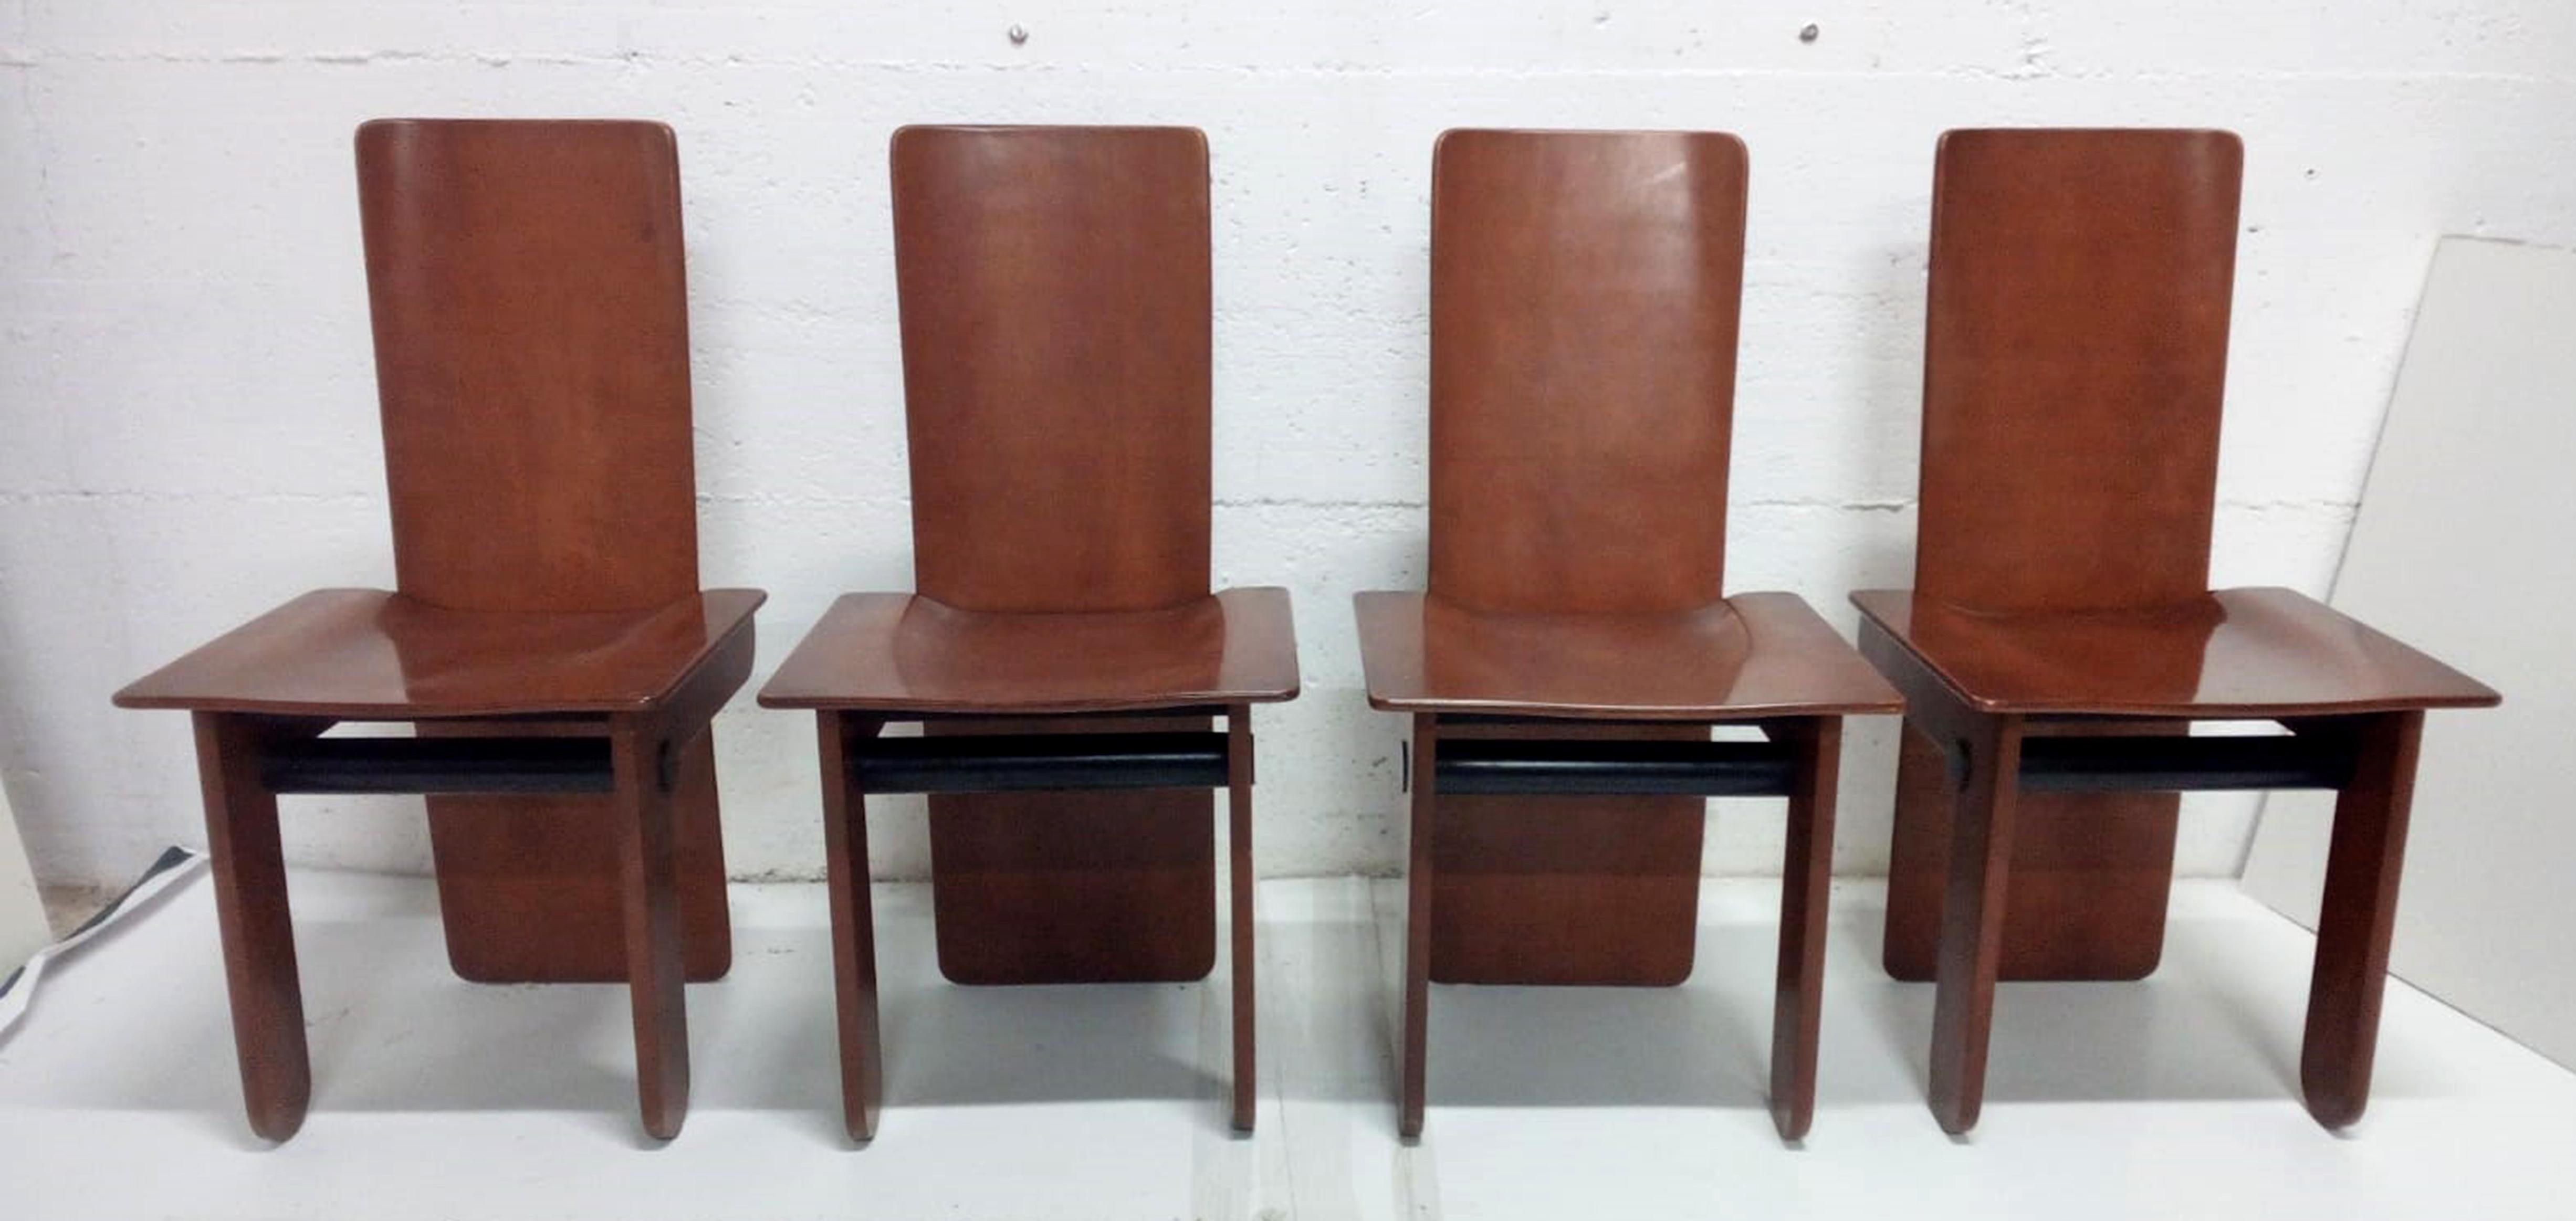 Gavina produced this rare series of four dining chairs designed by Carlo Scarpa in 1974. The style is a bit 'postmodern but still feels very contemporary. A combination of Italian pinus and ebonized wood. Very sculptural and architectural. Scarpa